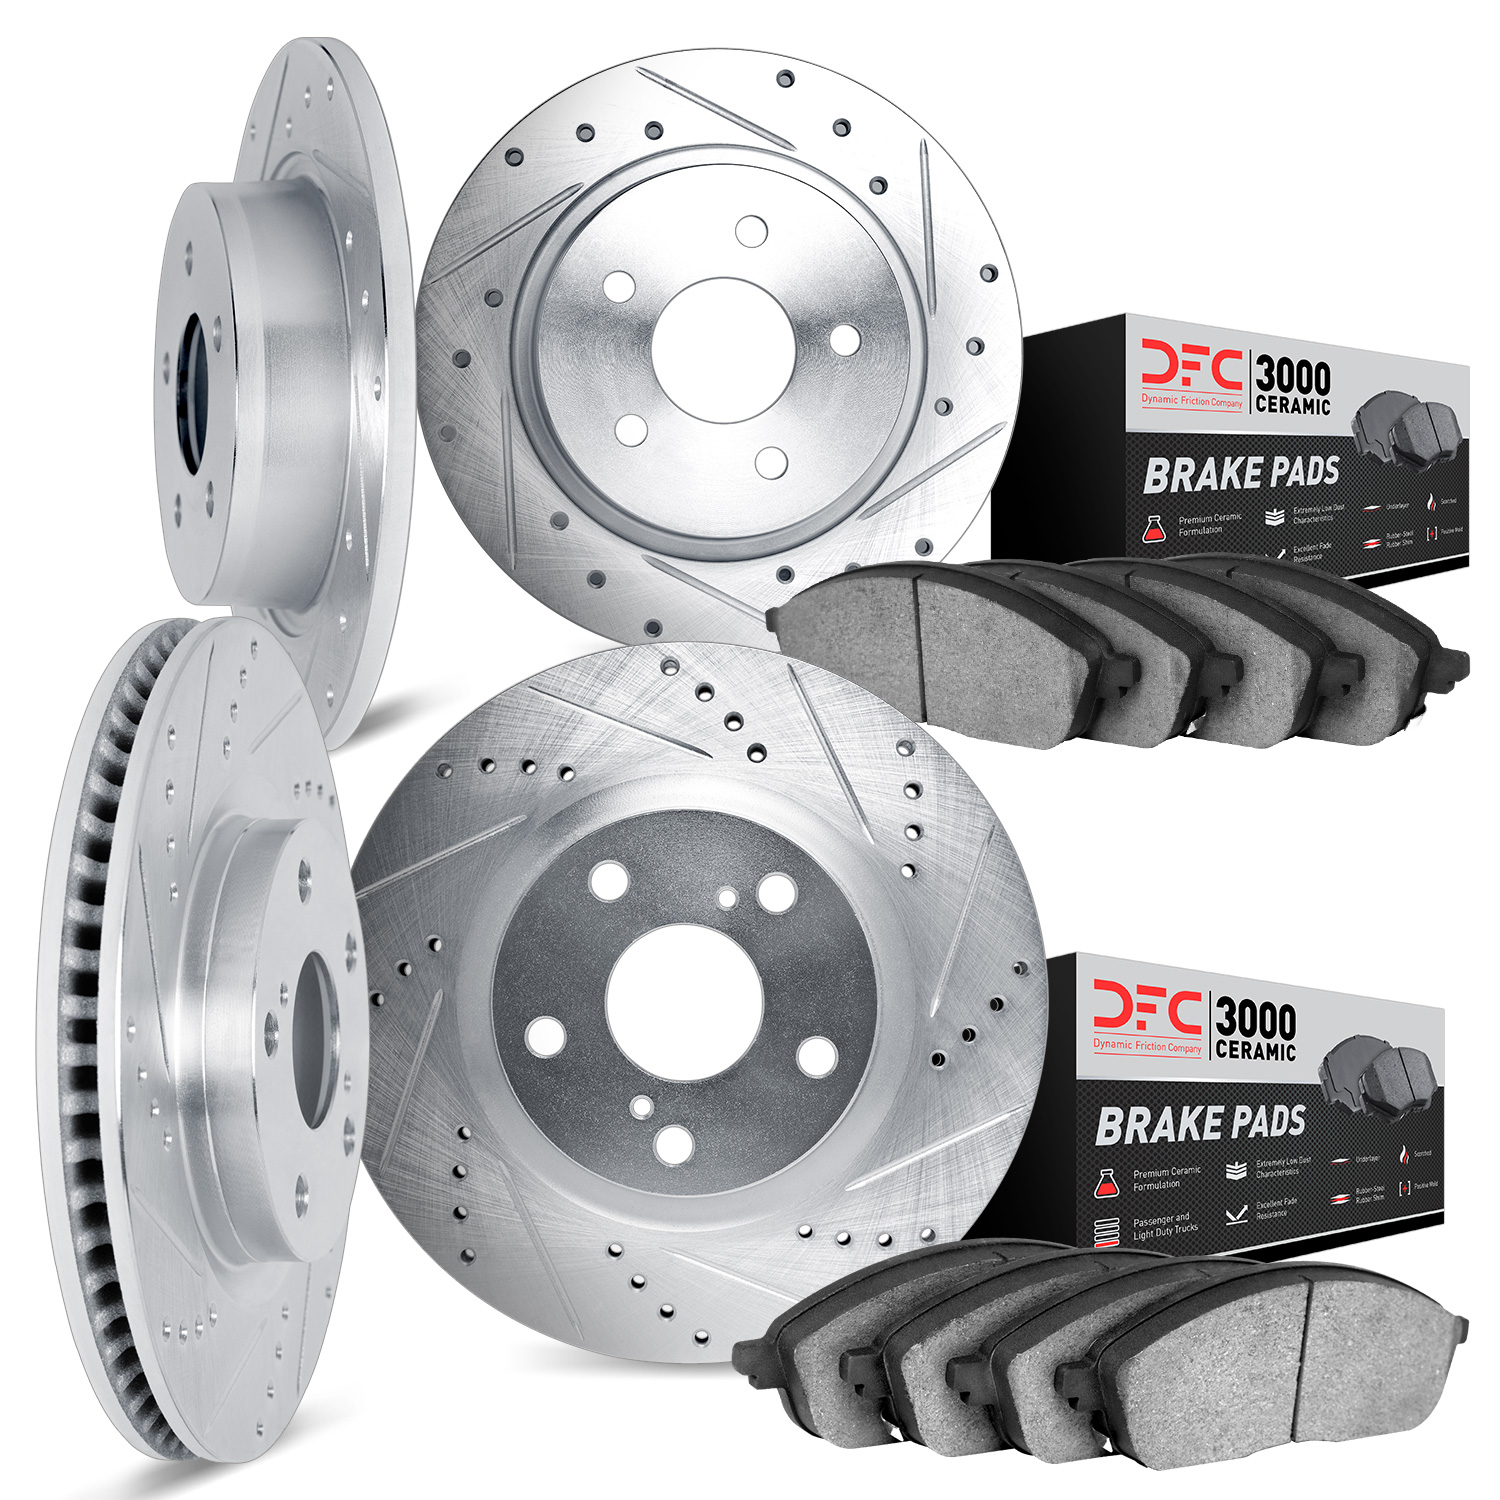 7304-76042 Drilled/Slotted Brake Rotor with 3000-Series Ceramic Brake Pads Kit [Silver], 1999-2001 Lexus/Toyota/Scion, Position: